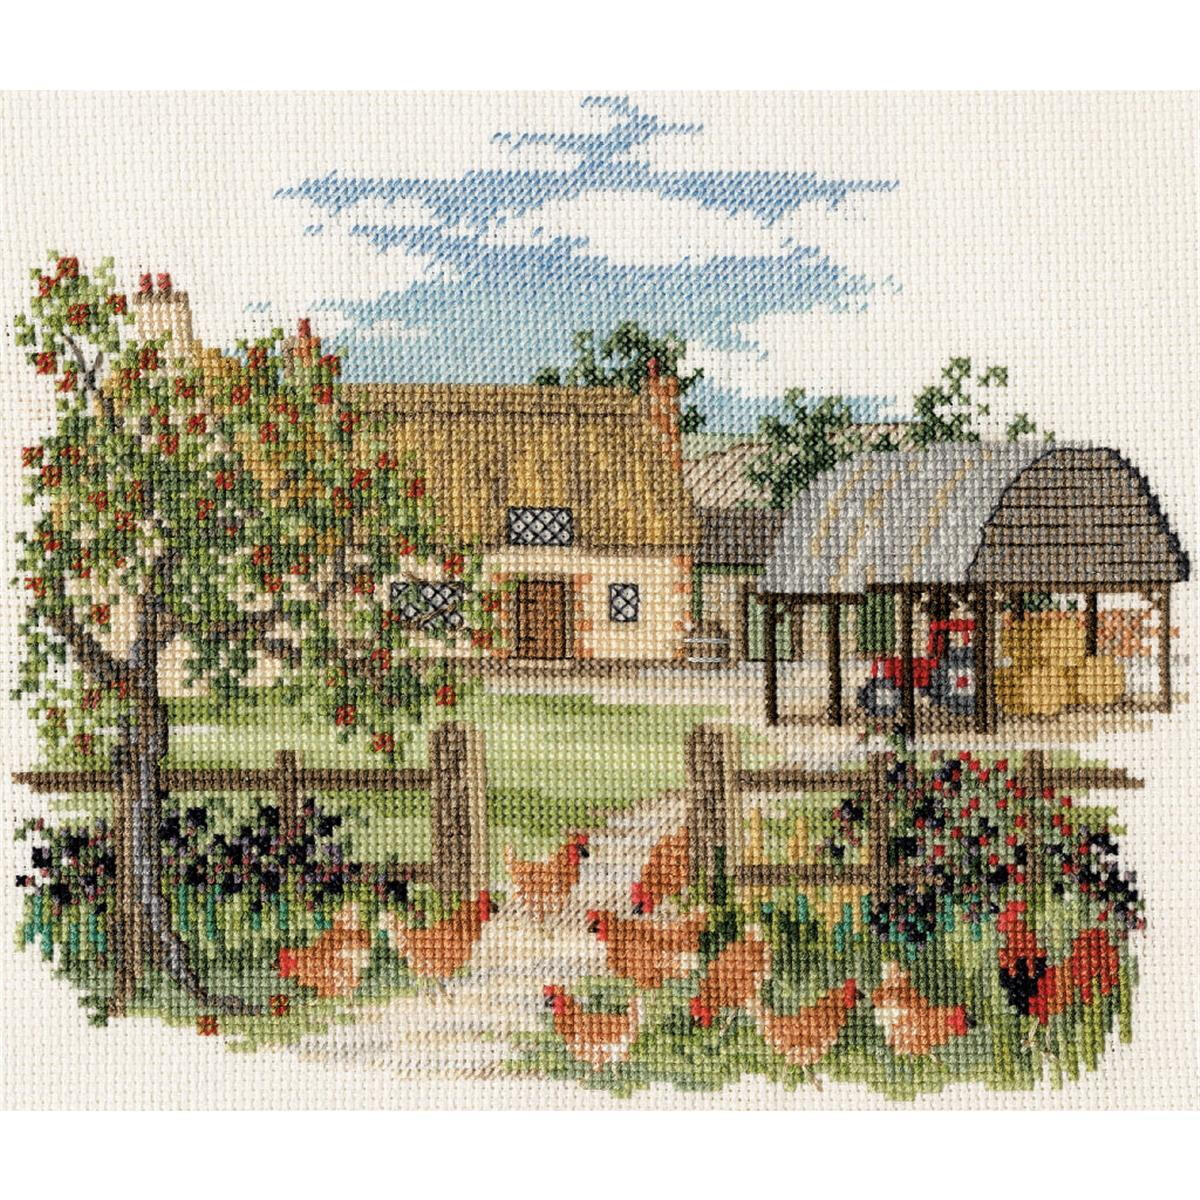 A cross stitch image of a picturesque rural scene with a...